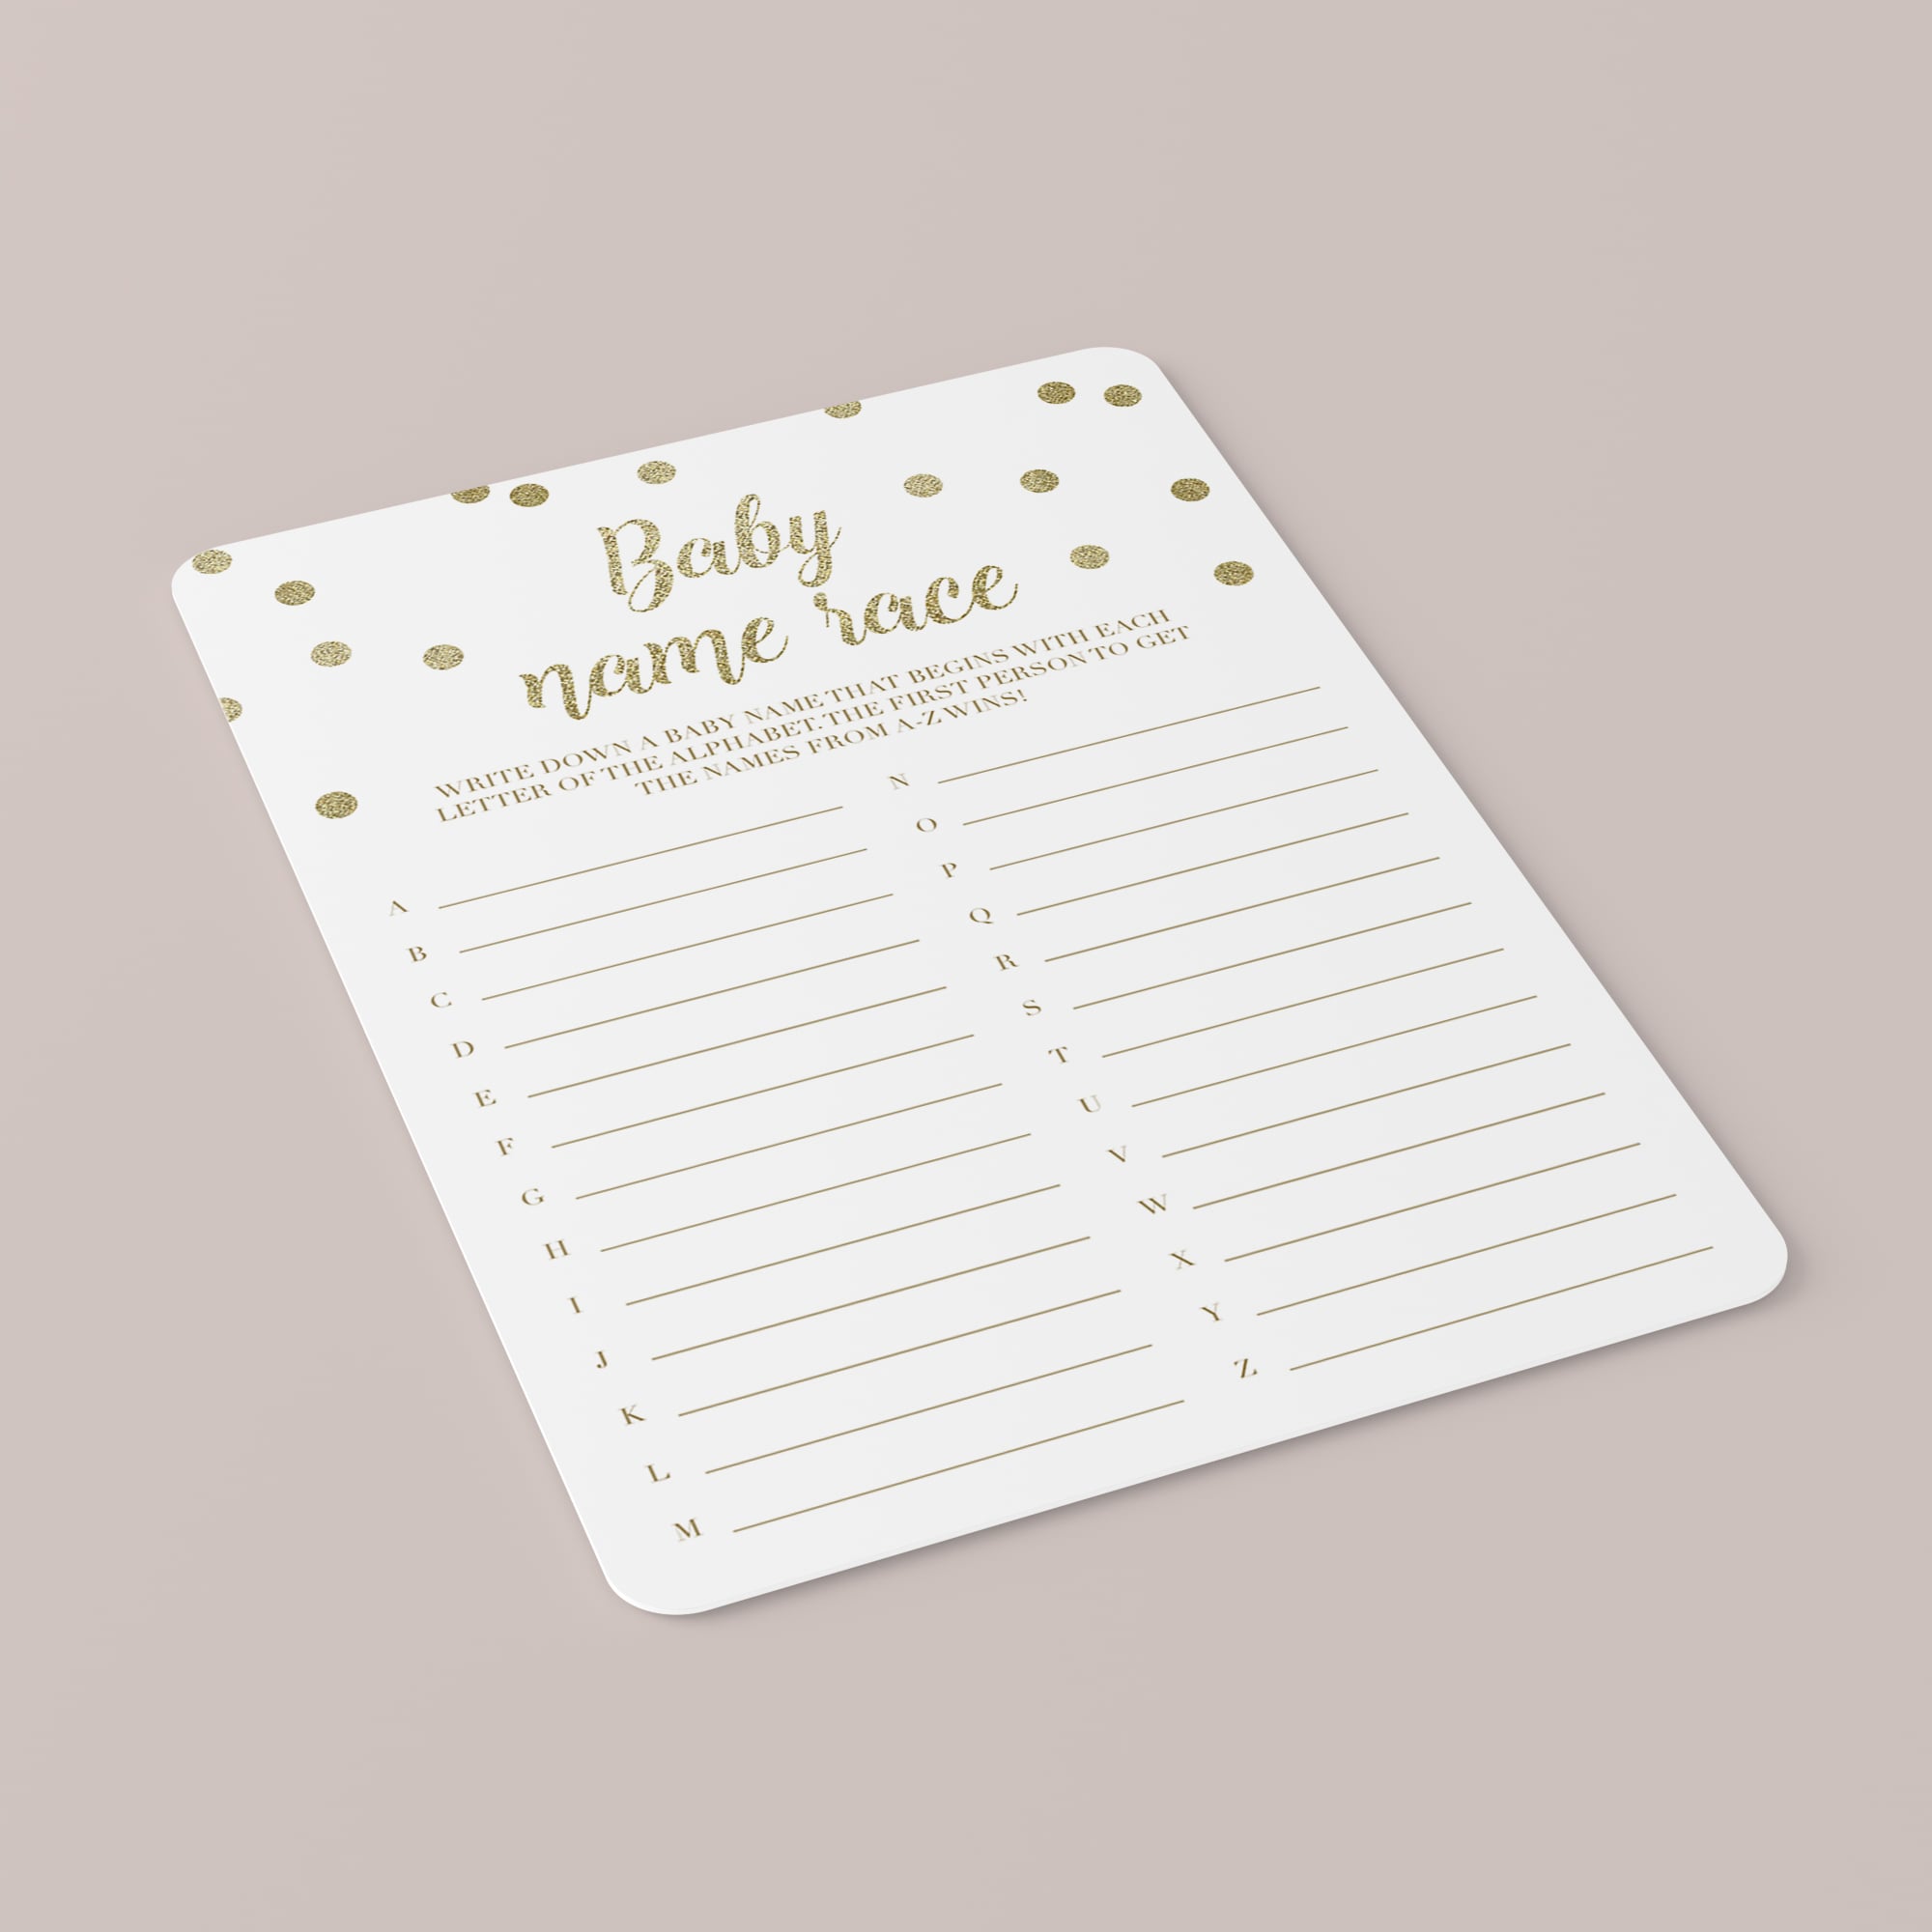 Instant download baby names a to z game printable by LittleSizzle